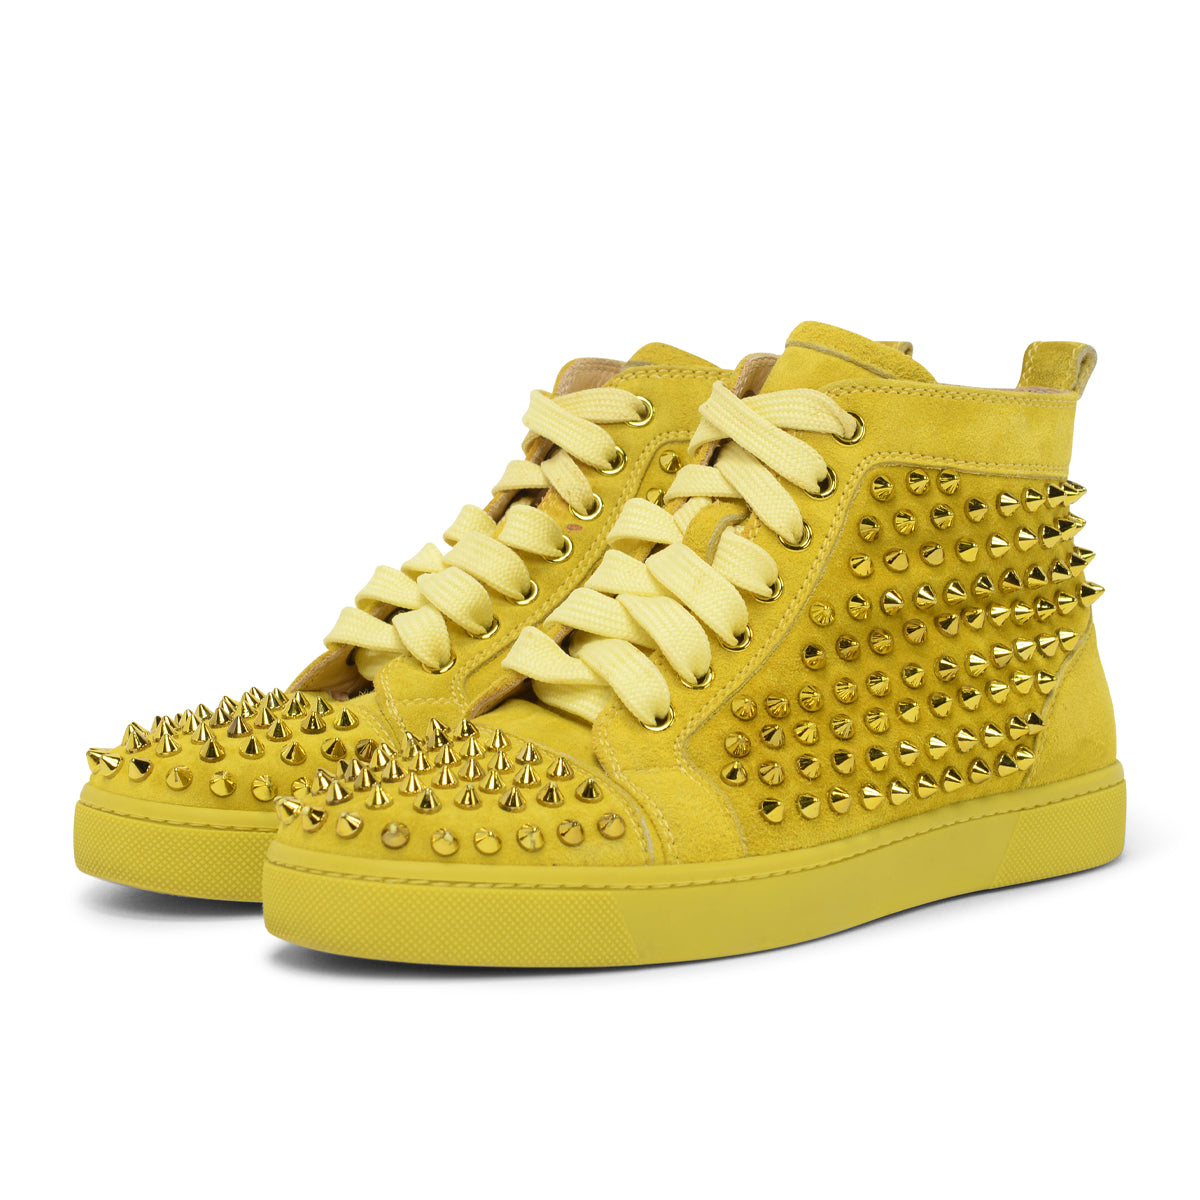 Best Deals for Louis Vuitton Spiked Shoes